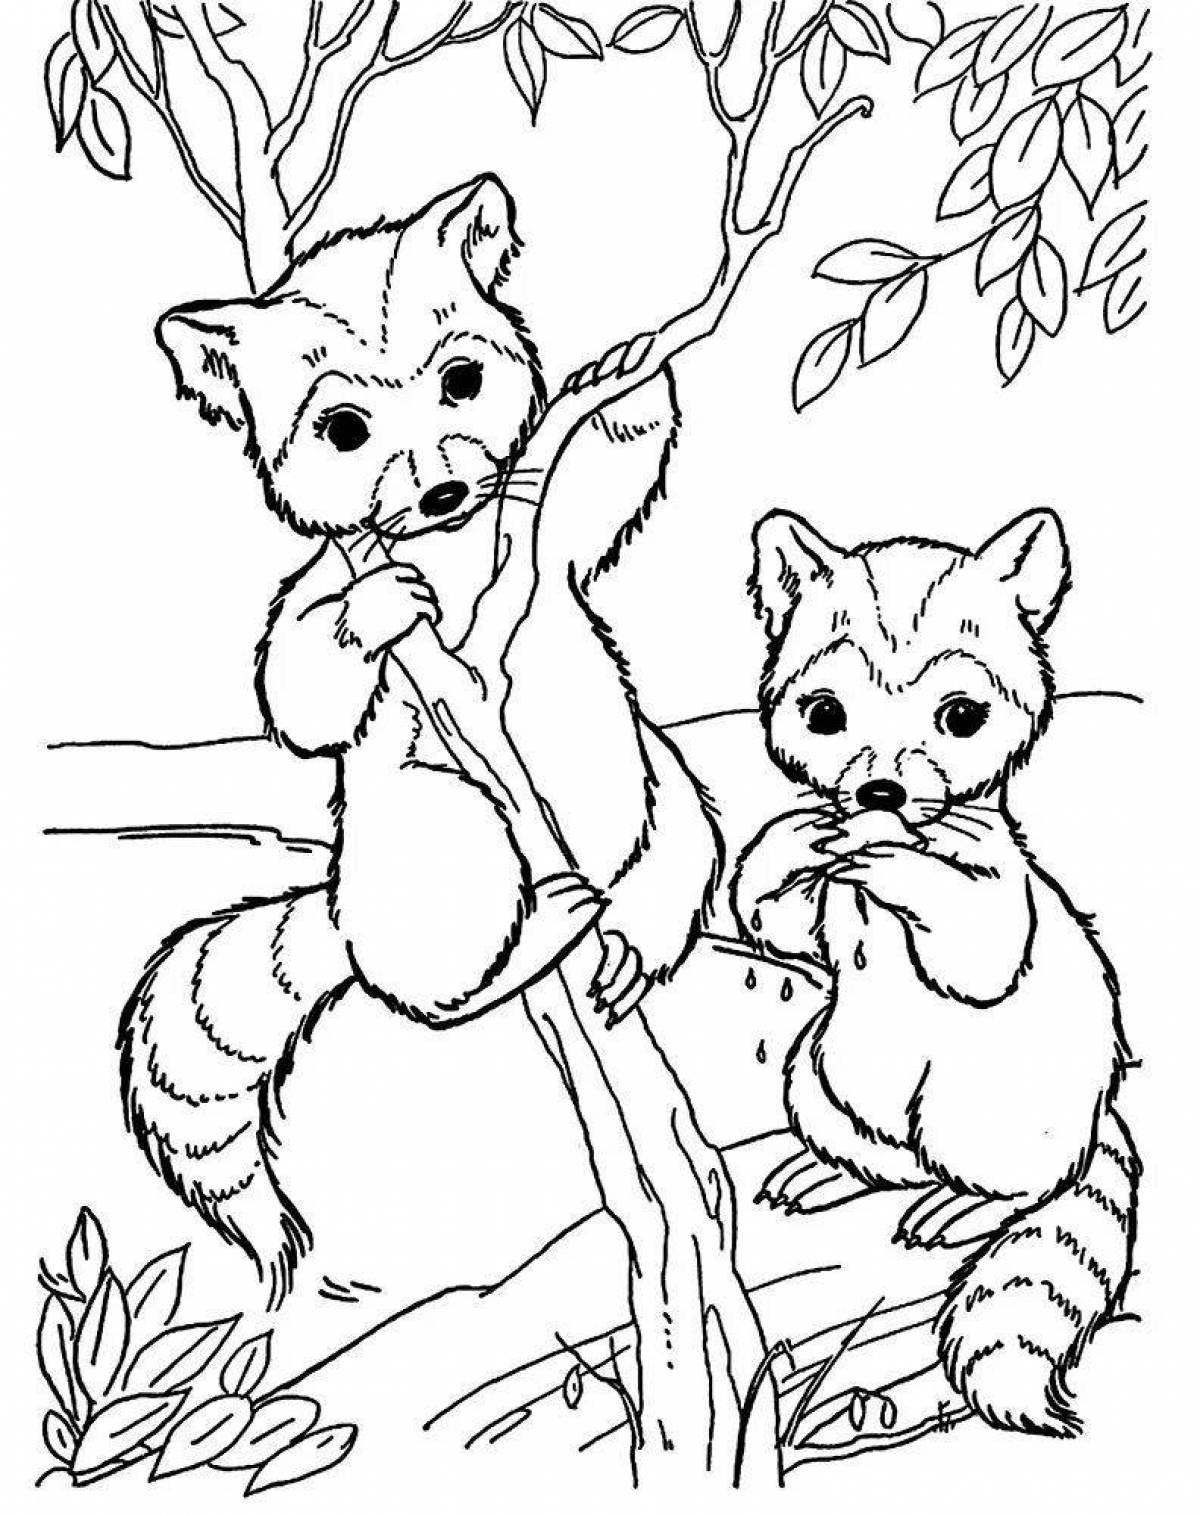 Adorable animal coloring pages for girls